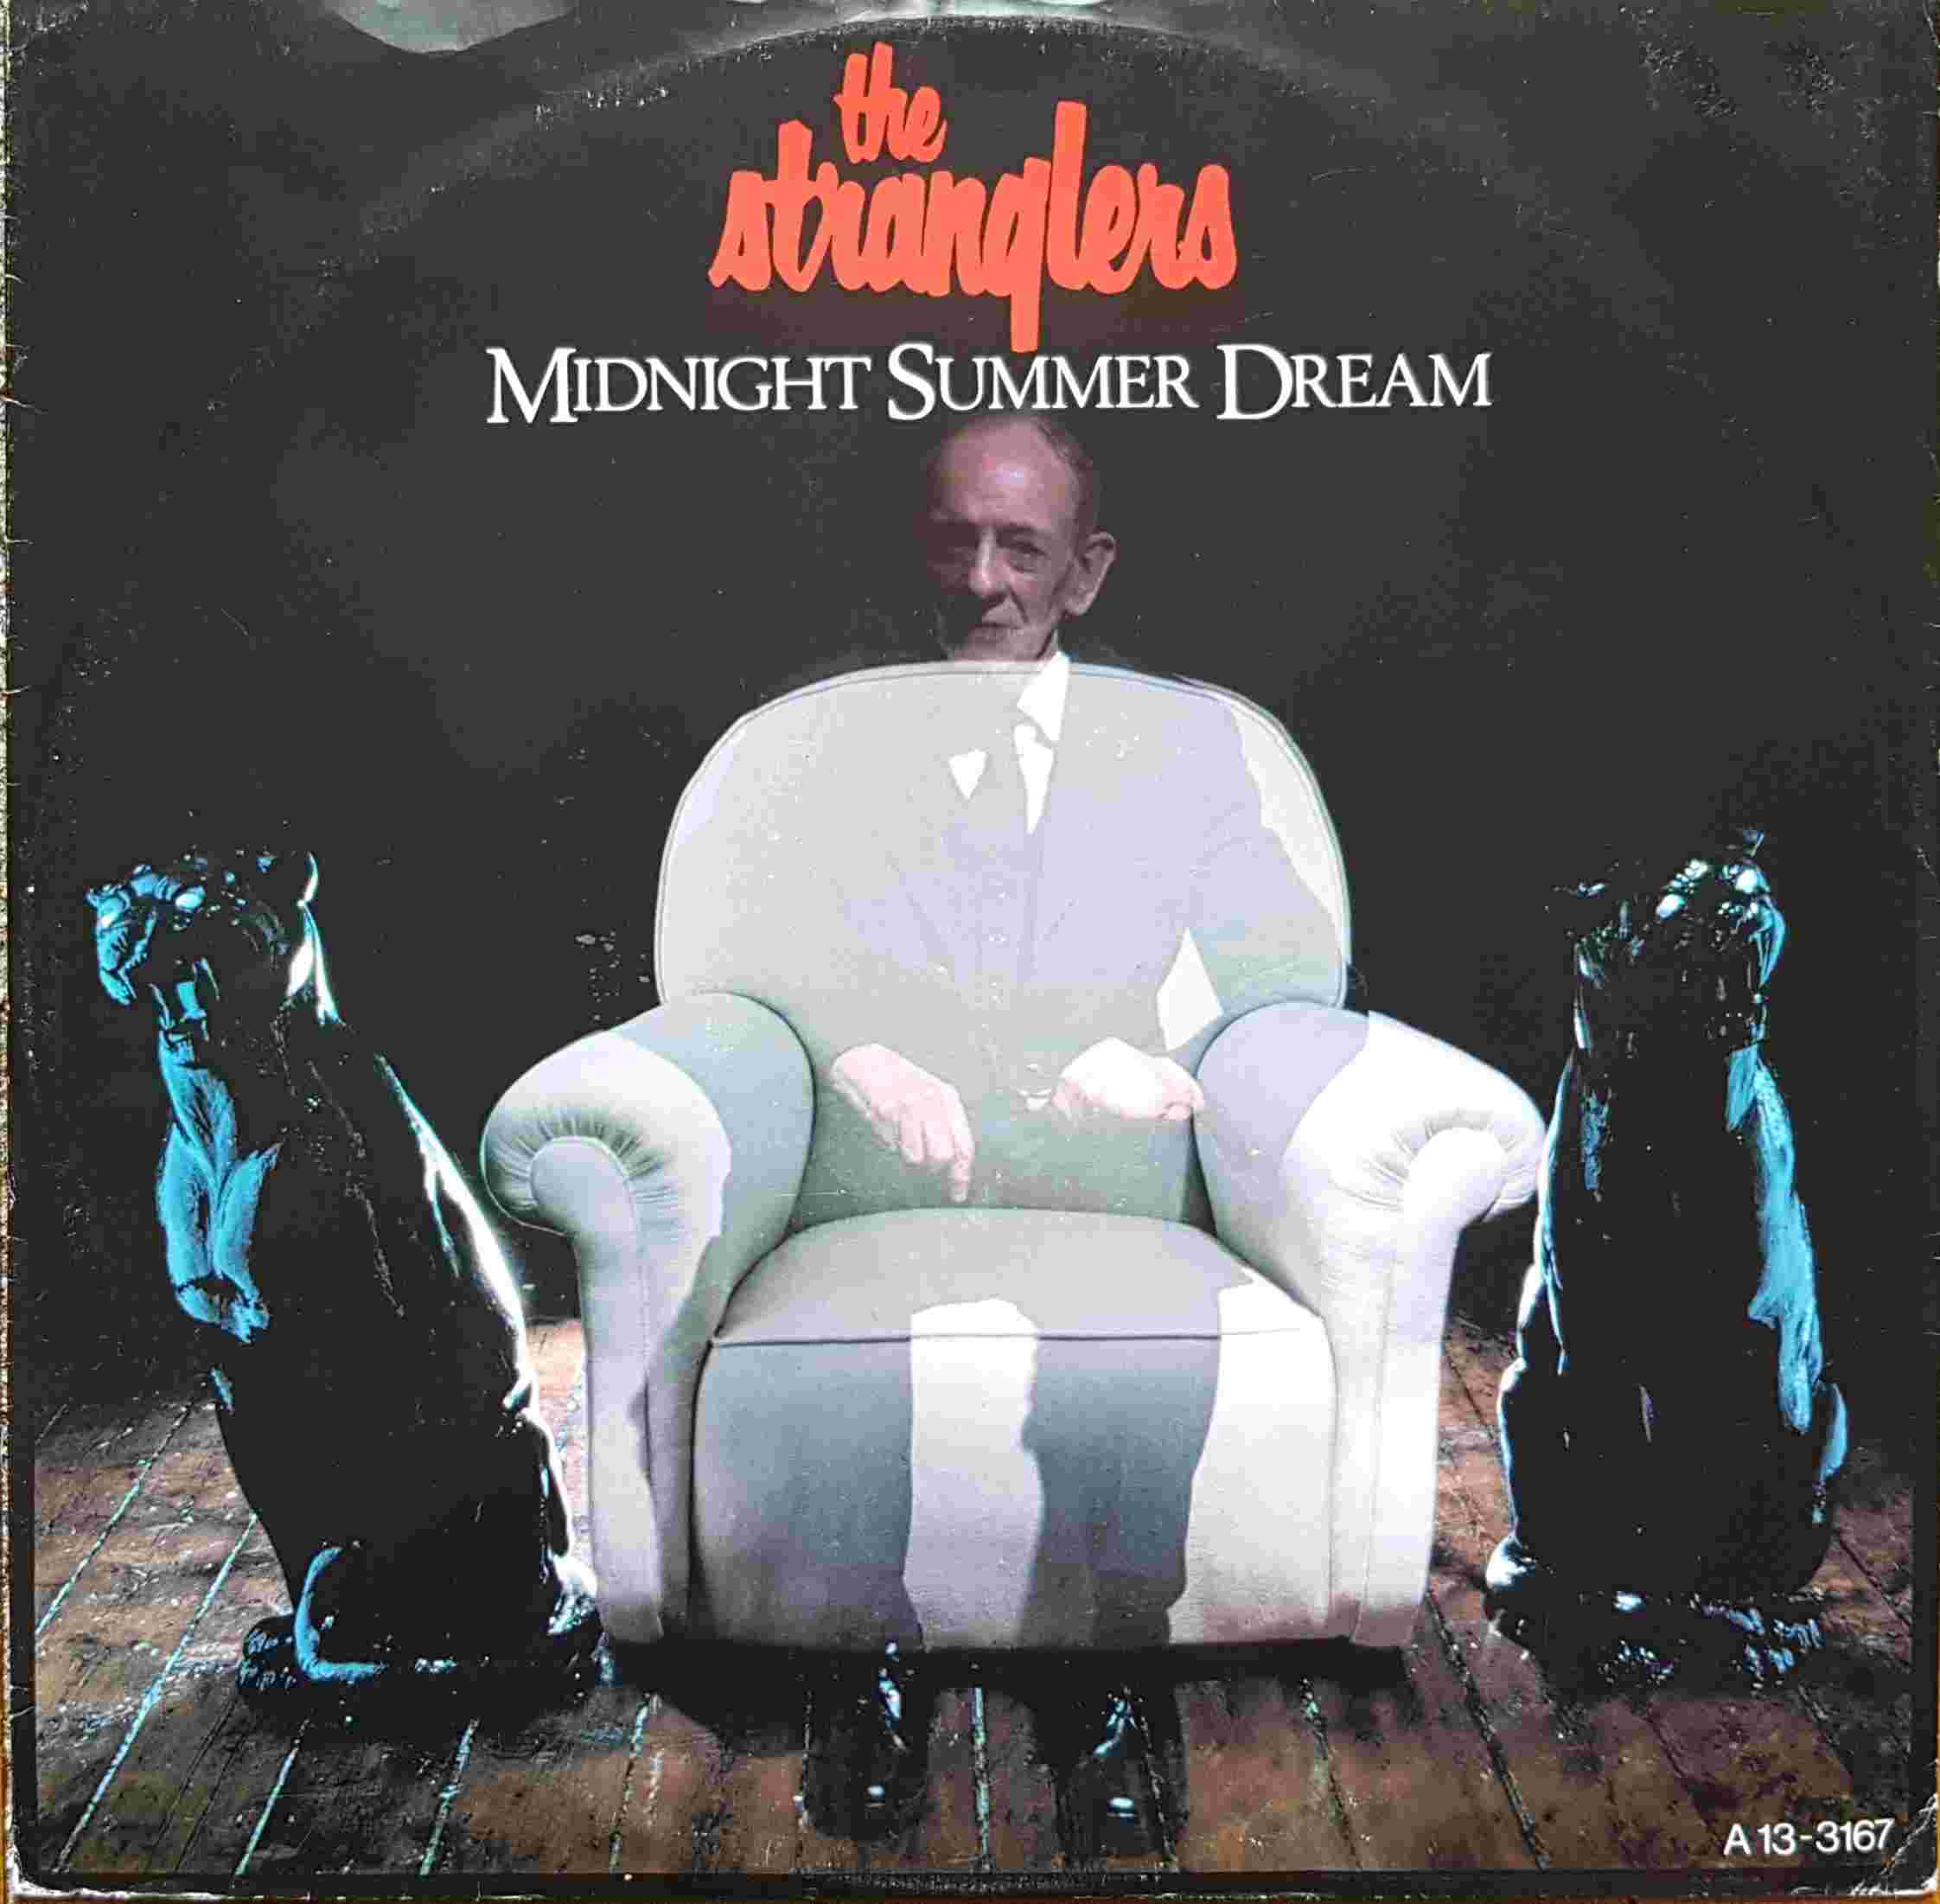 Picture of Midnight summer dream (Special single mix) by artist The Stranglers from The Stranglers 12inches